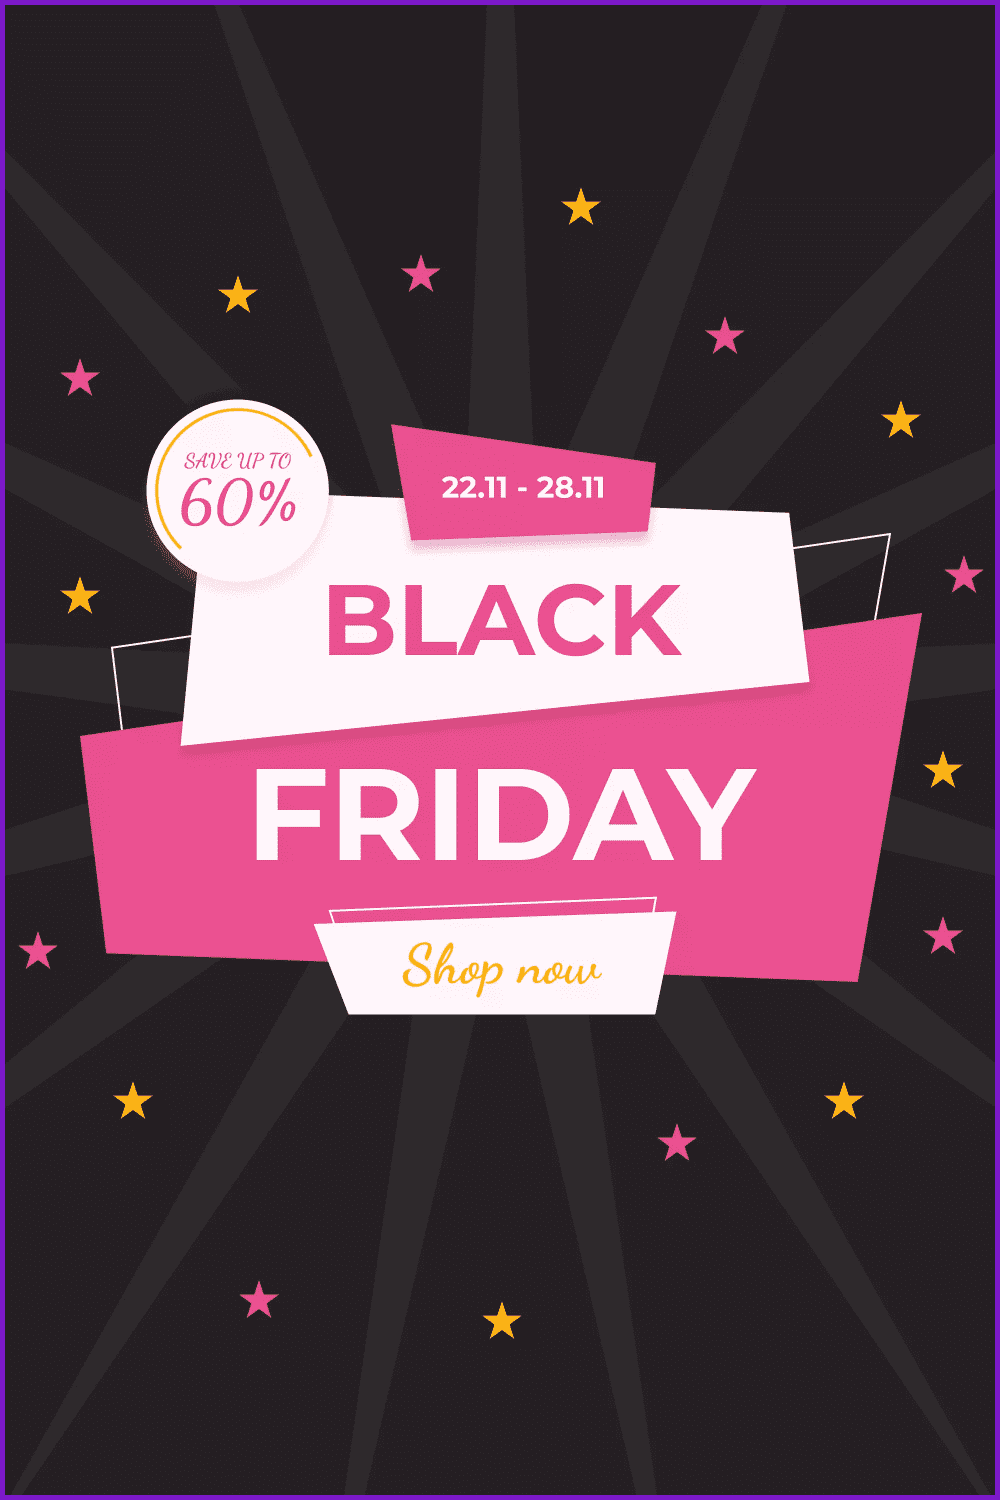 Poster for Black Friday with pink stripes and stars.